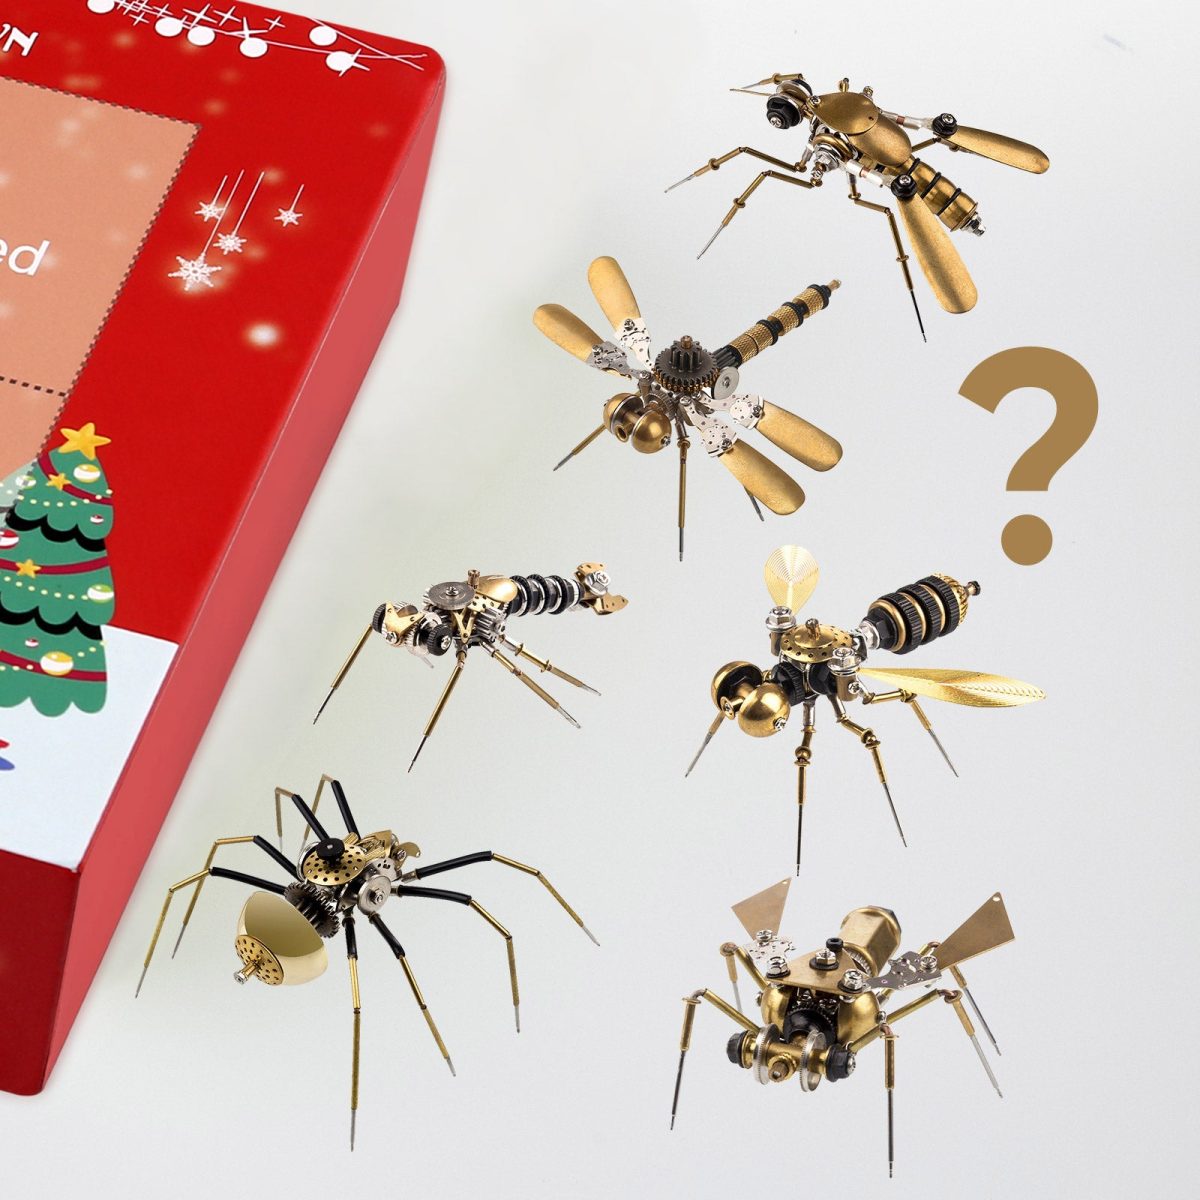 3D Metal Insect Bugs Advent Calendar DIY Kit - Countdown to Christmas